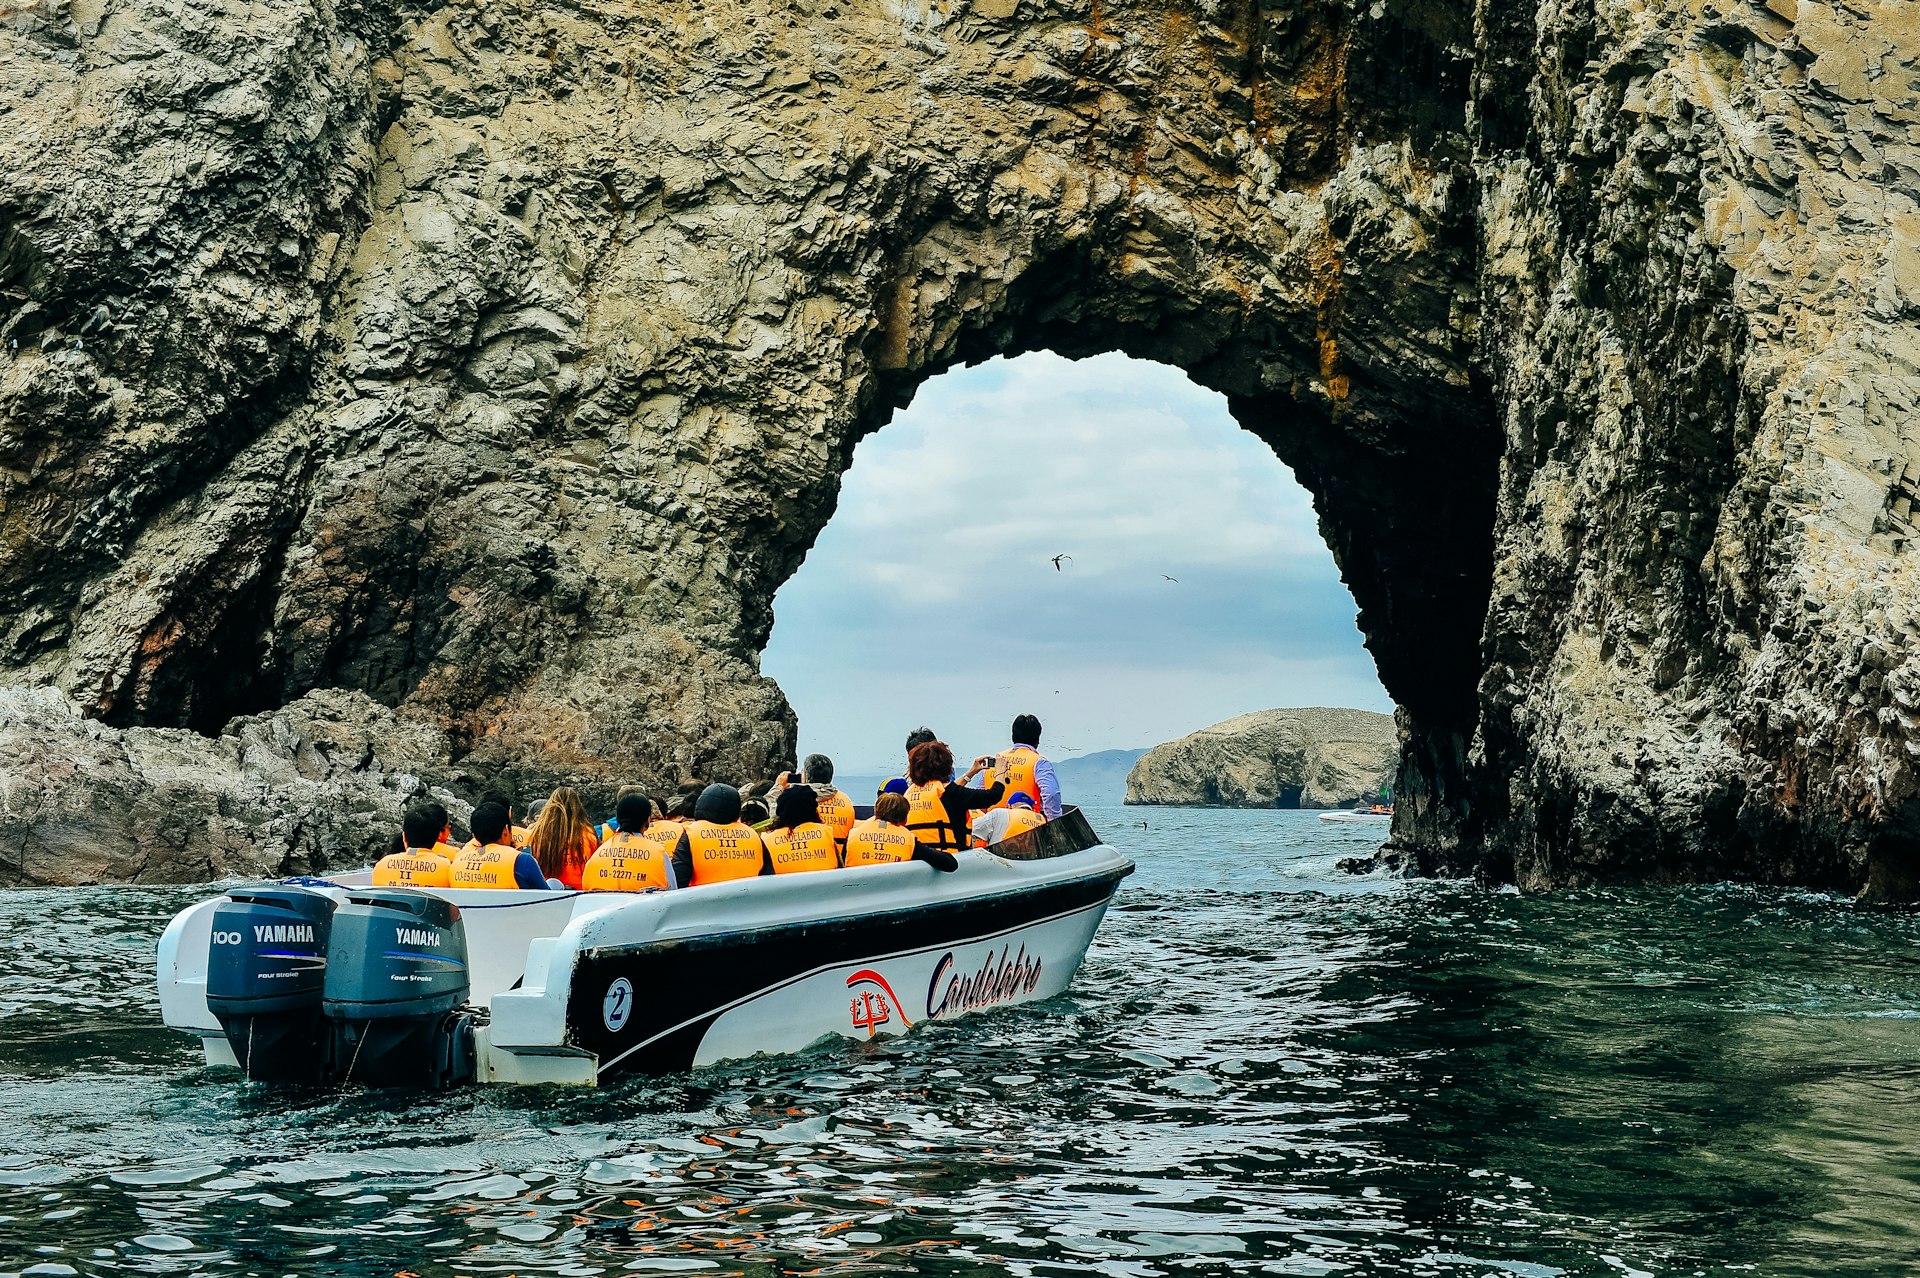 People wearing safety vests sit in a boat that is touring an island